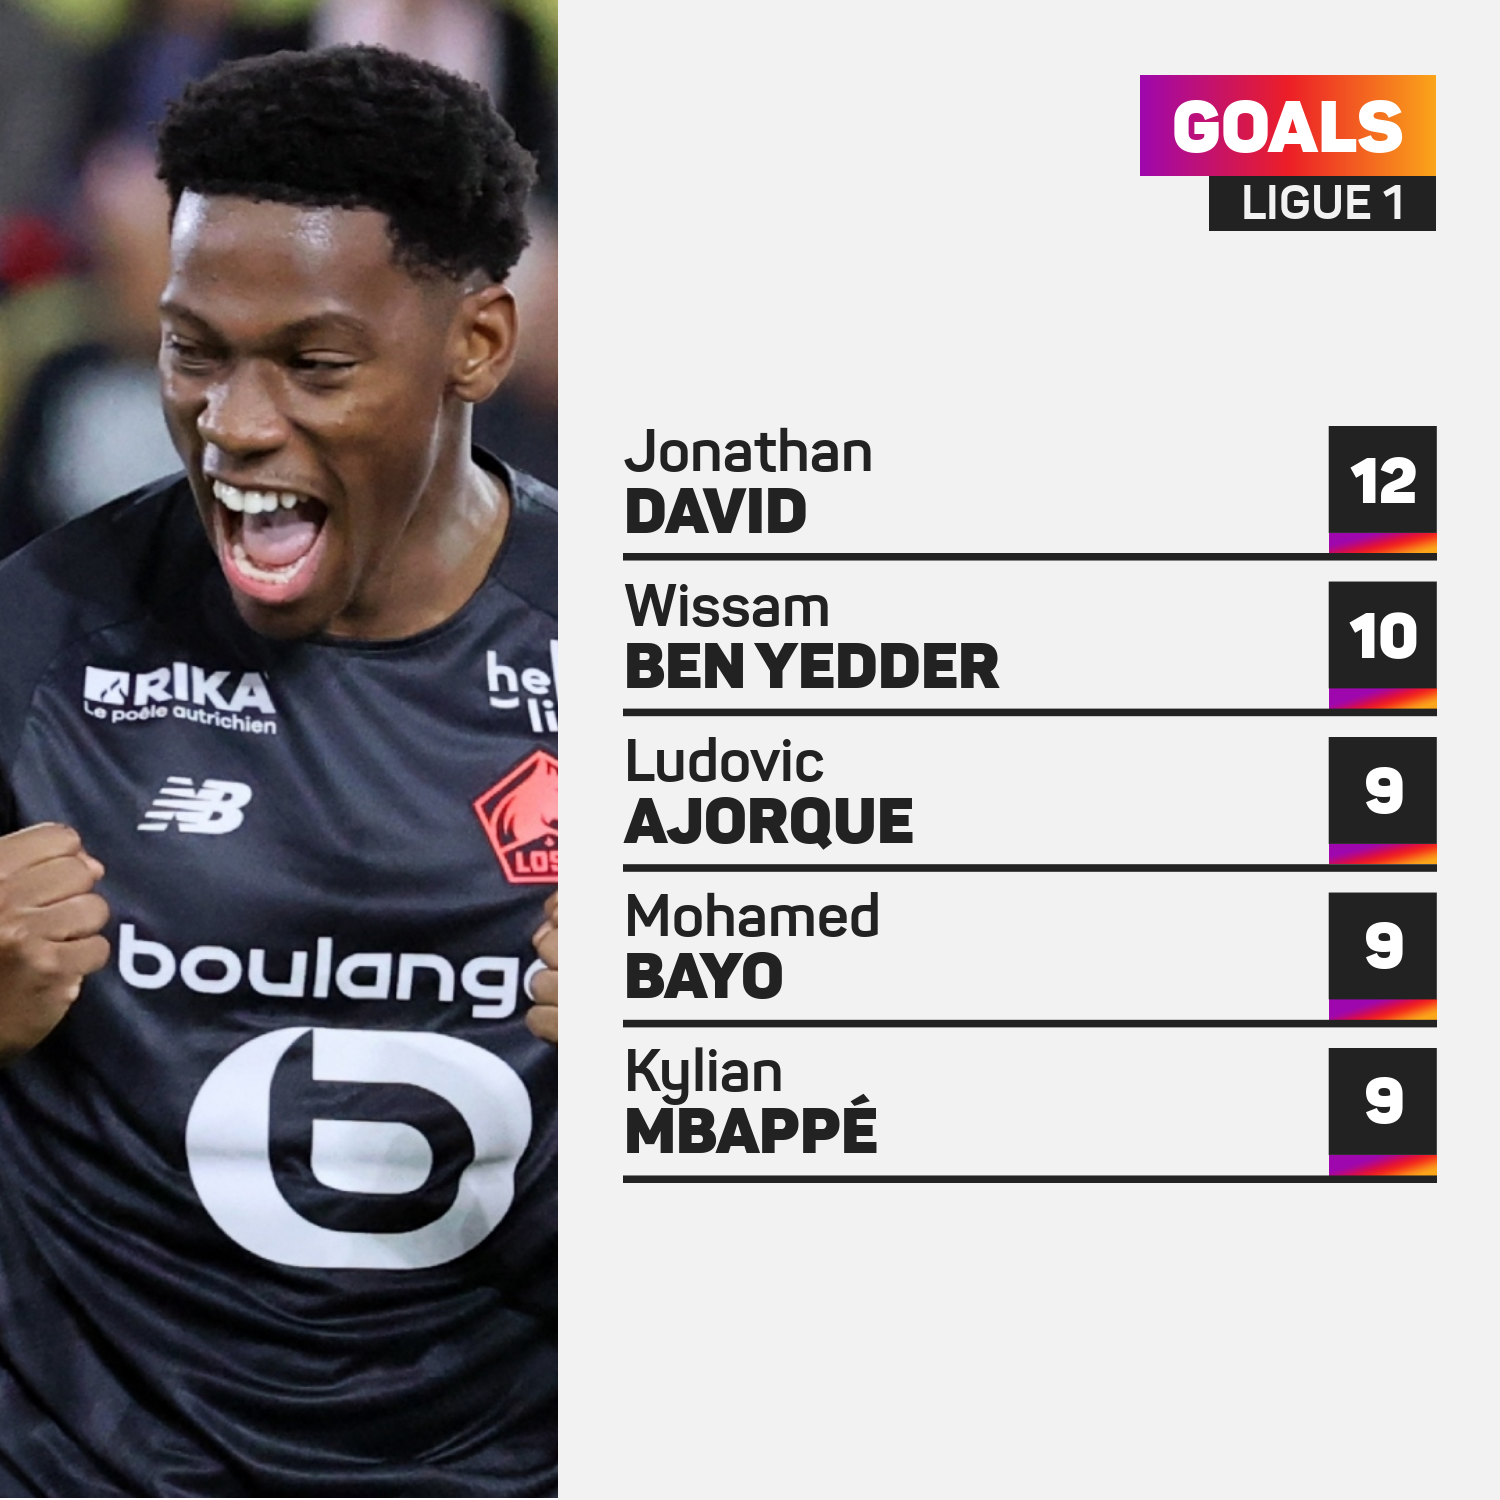 Ligue 1 top goalscorers as of end of 2021